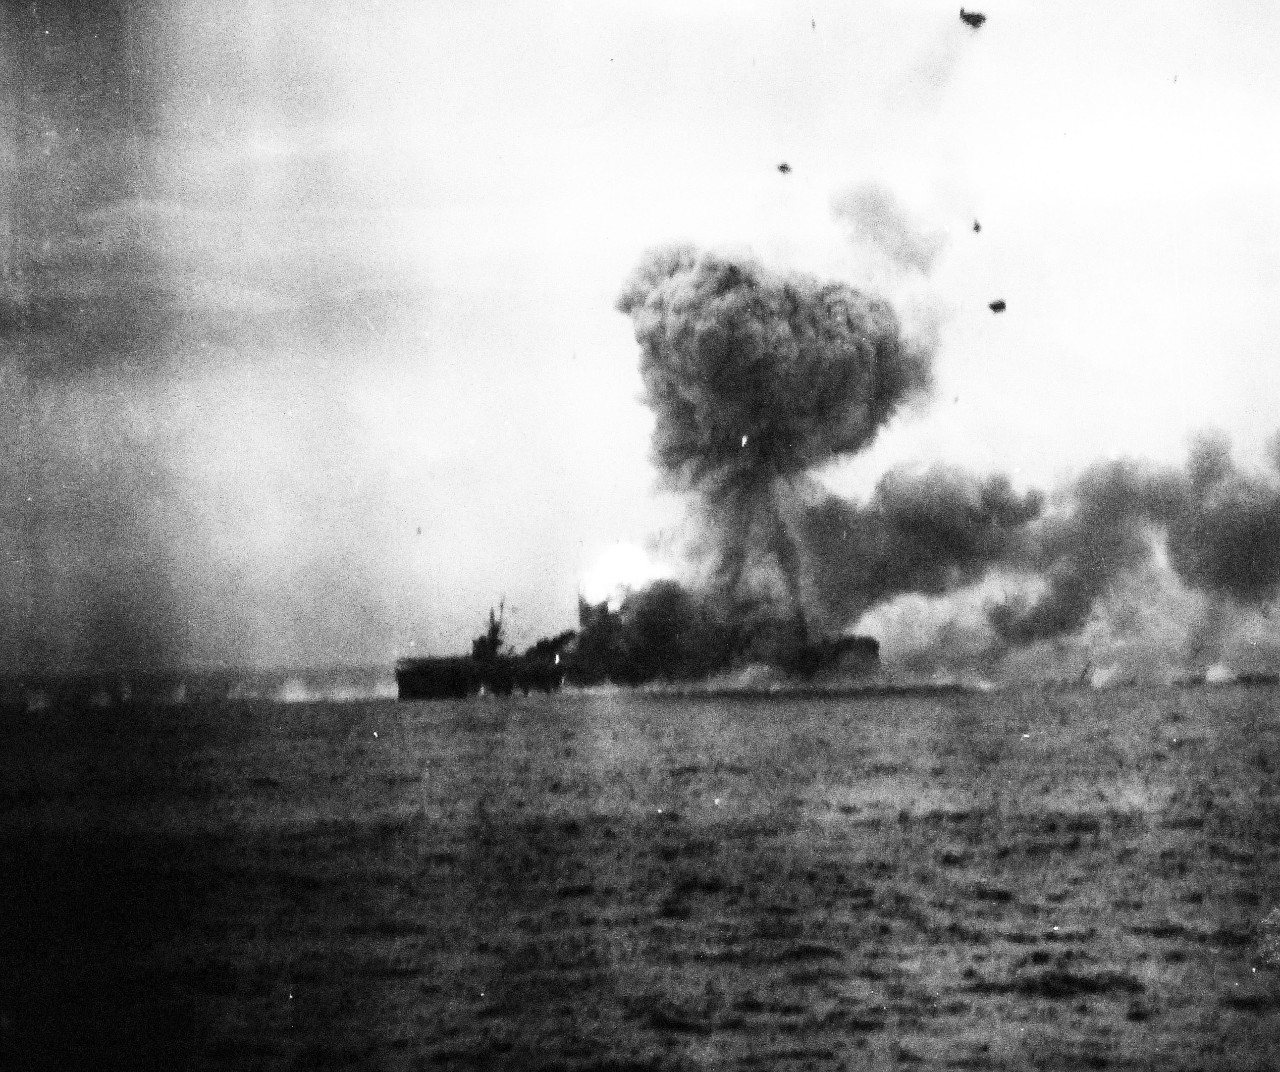 80-G-270513:  USS St. Lo (CVE-63), October 25, 1944.  St. Lo burning after being hit by a Japanese suicide plane off Leyte Gulf, Philippines.  Taken from USS Kalinin Bay (CVE-68).   View shows the moments after the second explosion.  Official U.S. Navy Photograph, now in the collections of the National Archives.  